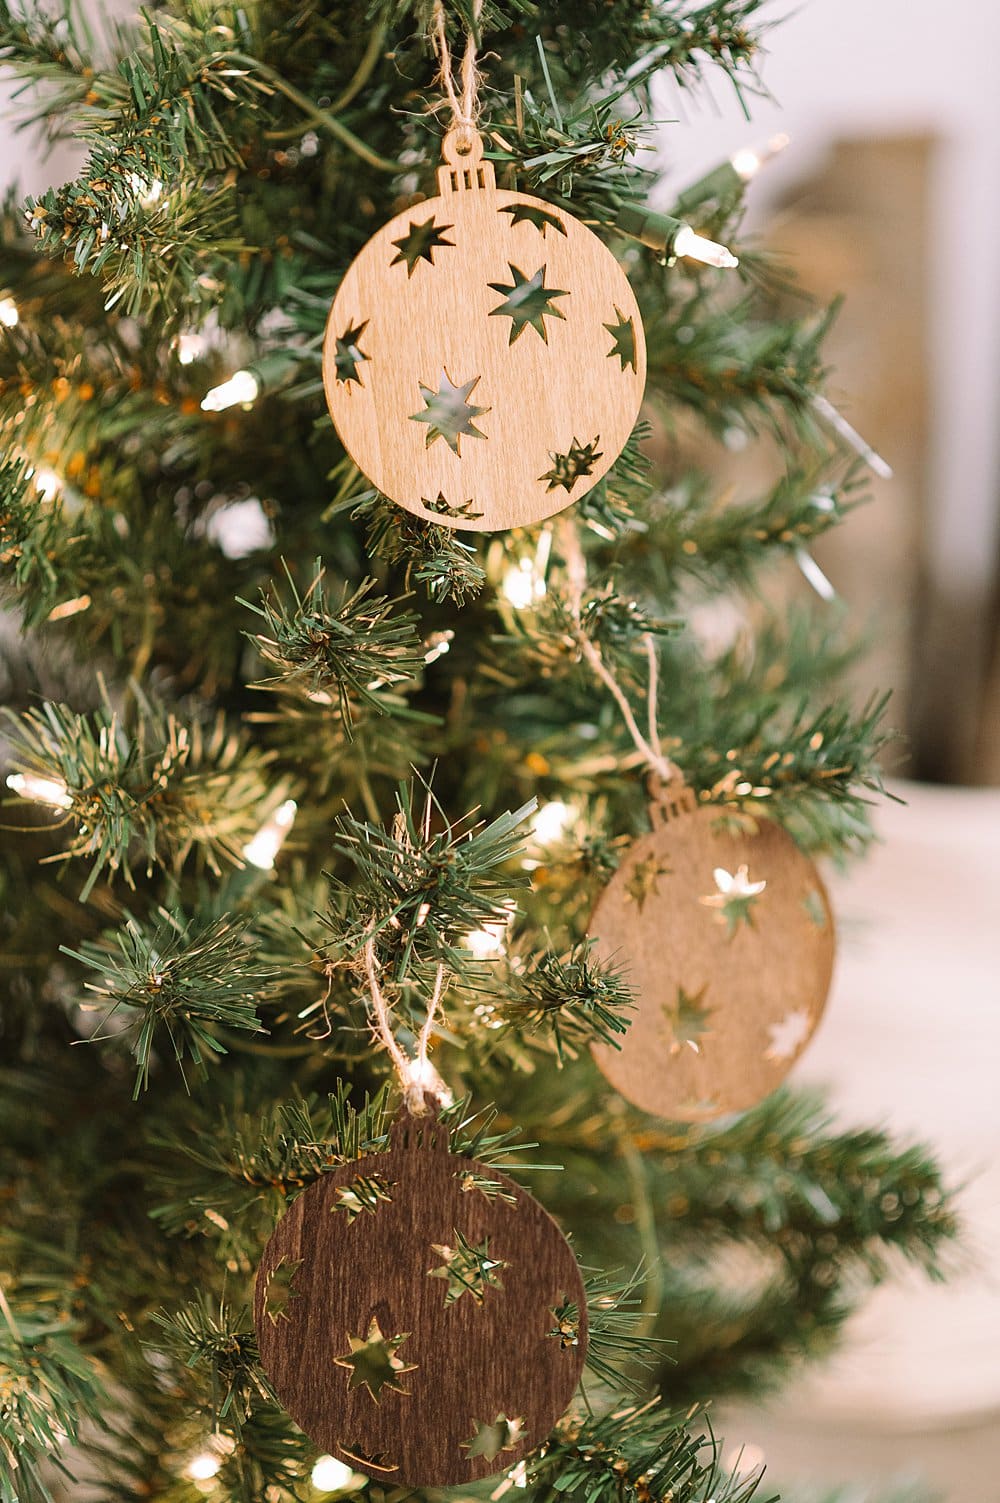 How to Stain Wood Ornaments from Dollar Tree